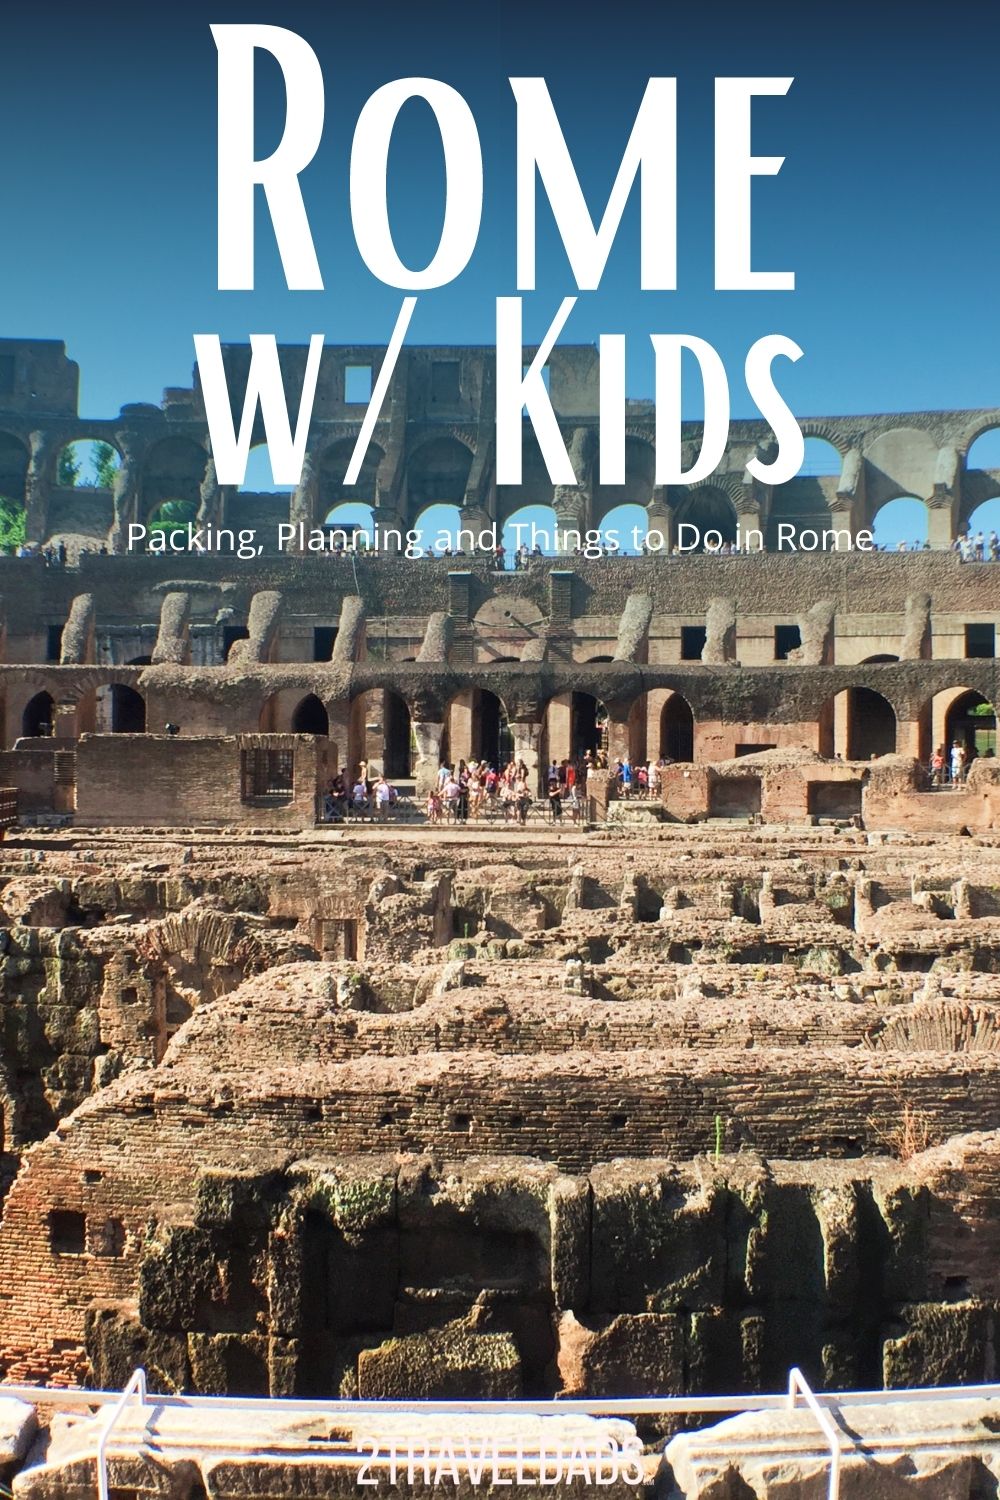 Rome with kids is an exciting trip not to be forgotten. Tips for planning, where to stay and best things to do in Rome with kids.